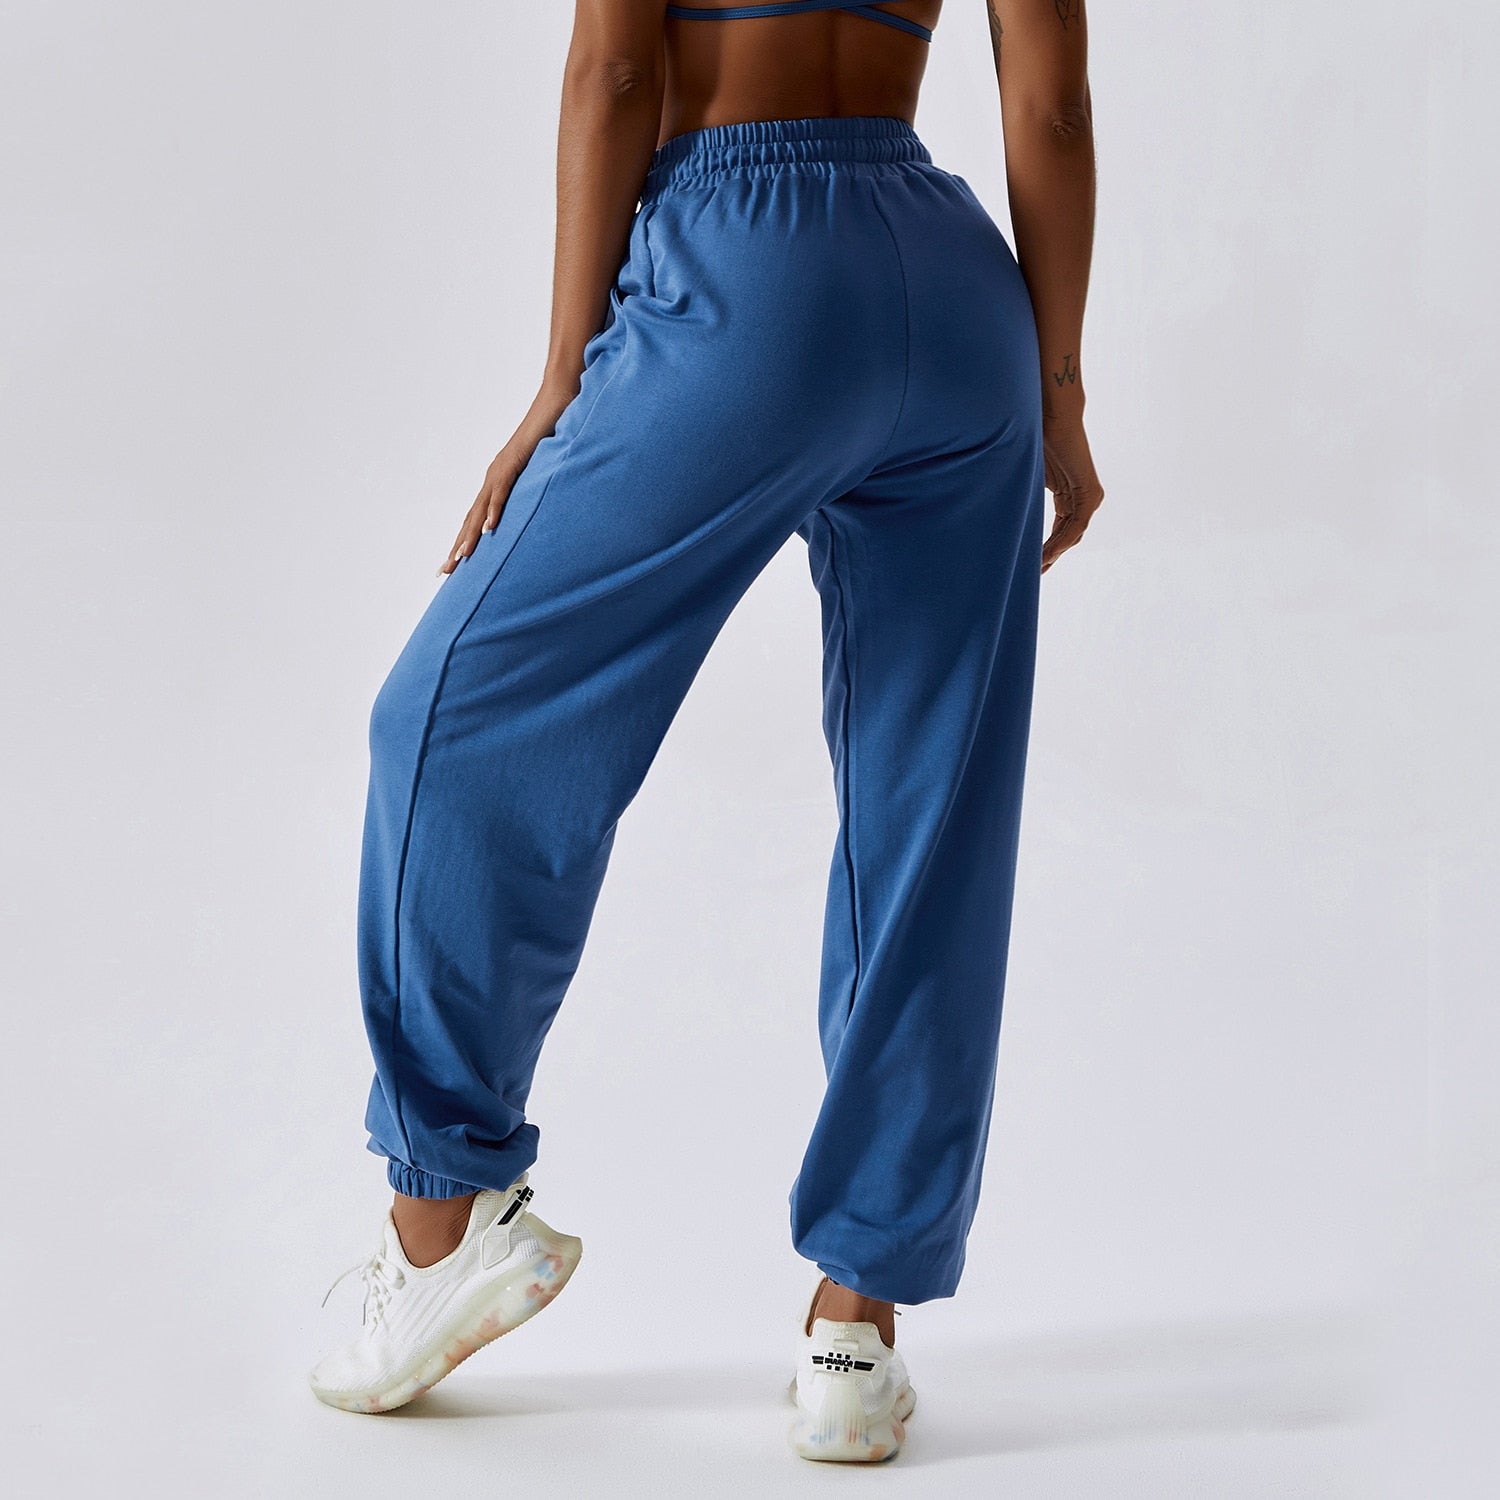 Womens Fitness Tracksuit Set With Fleece Leggings, Button Vest, And  Sportswear For Yoga, Gym, Workouts, Tech Wear, Fashion, Mens And Womens  Active Suit From Bianvincentyg, $20.38 | DHgate.Com